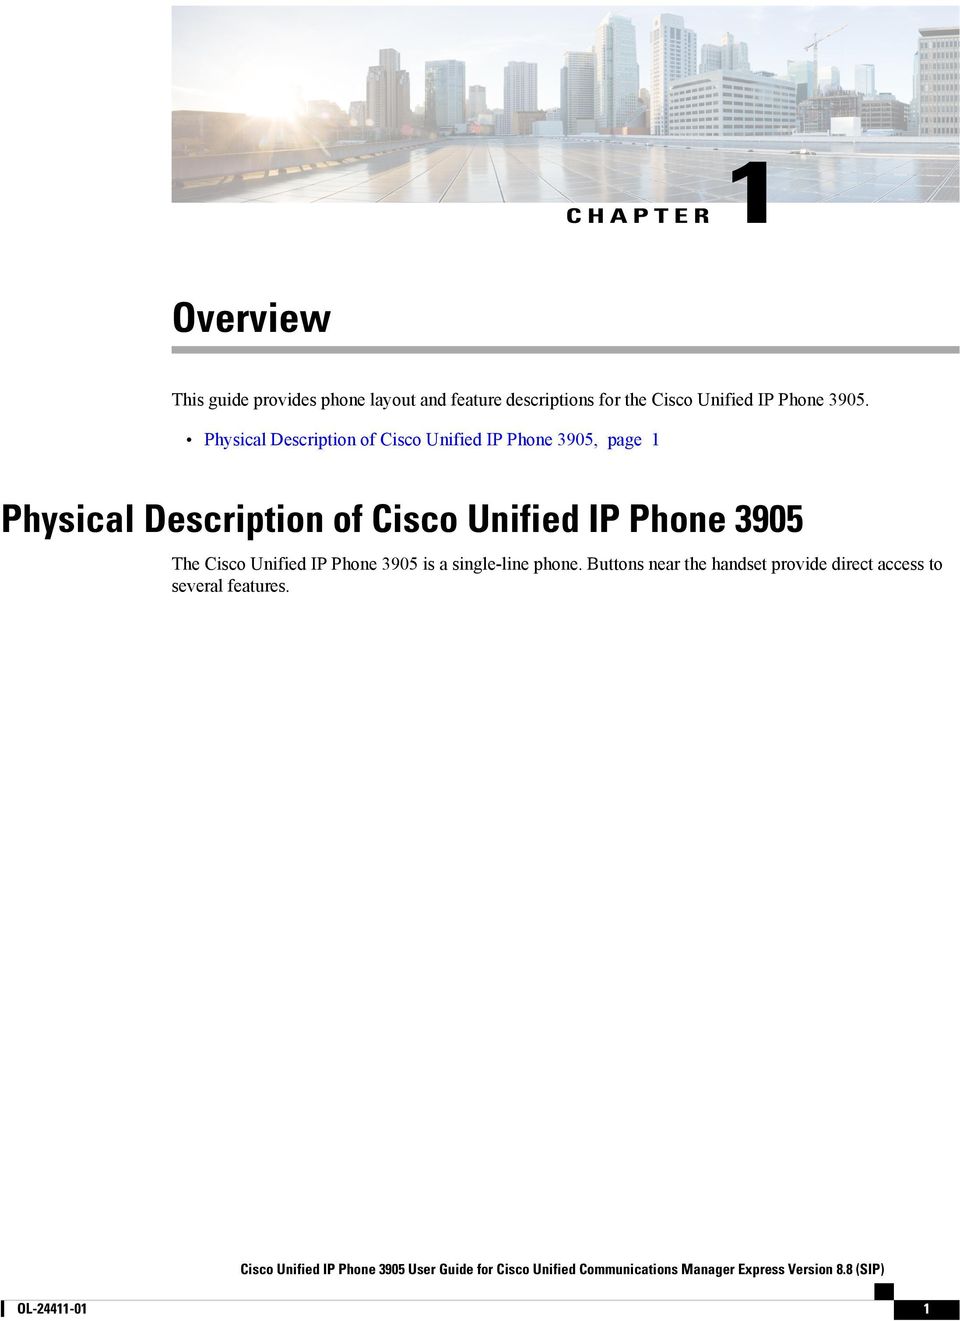 Physical Description of Cisco Unified IP Phone 3905, page 1 Physical Description of Cisco